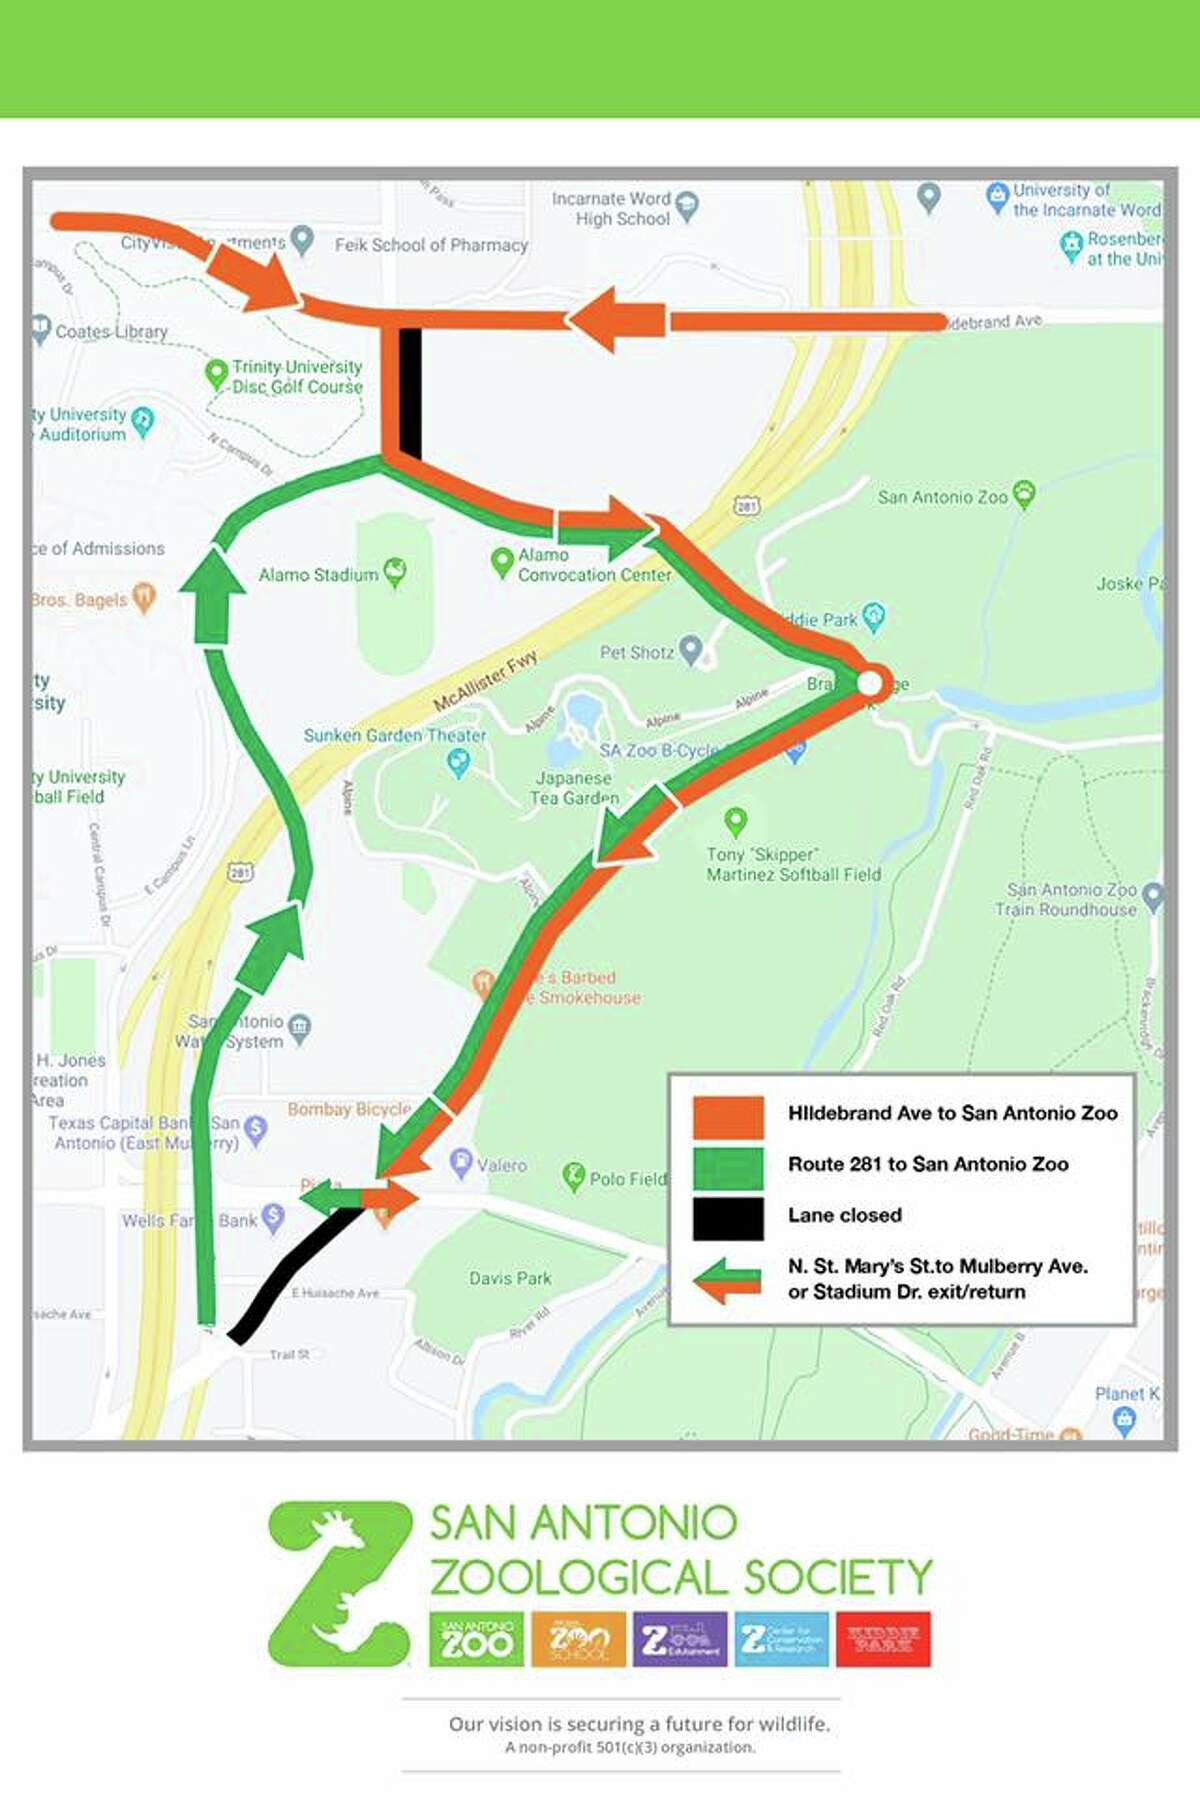 In an effort to ease the traffic problems around Brackenridge Park for spring break, the San Antonio Zoo and the city have created a new traffic plan for the area.